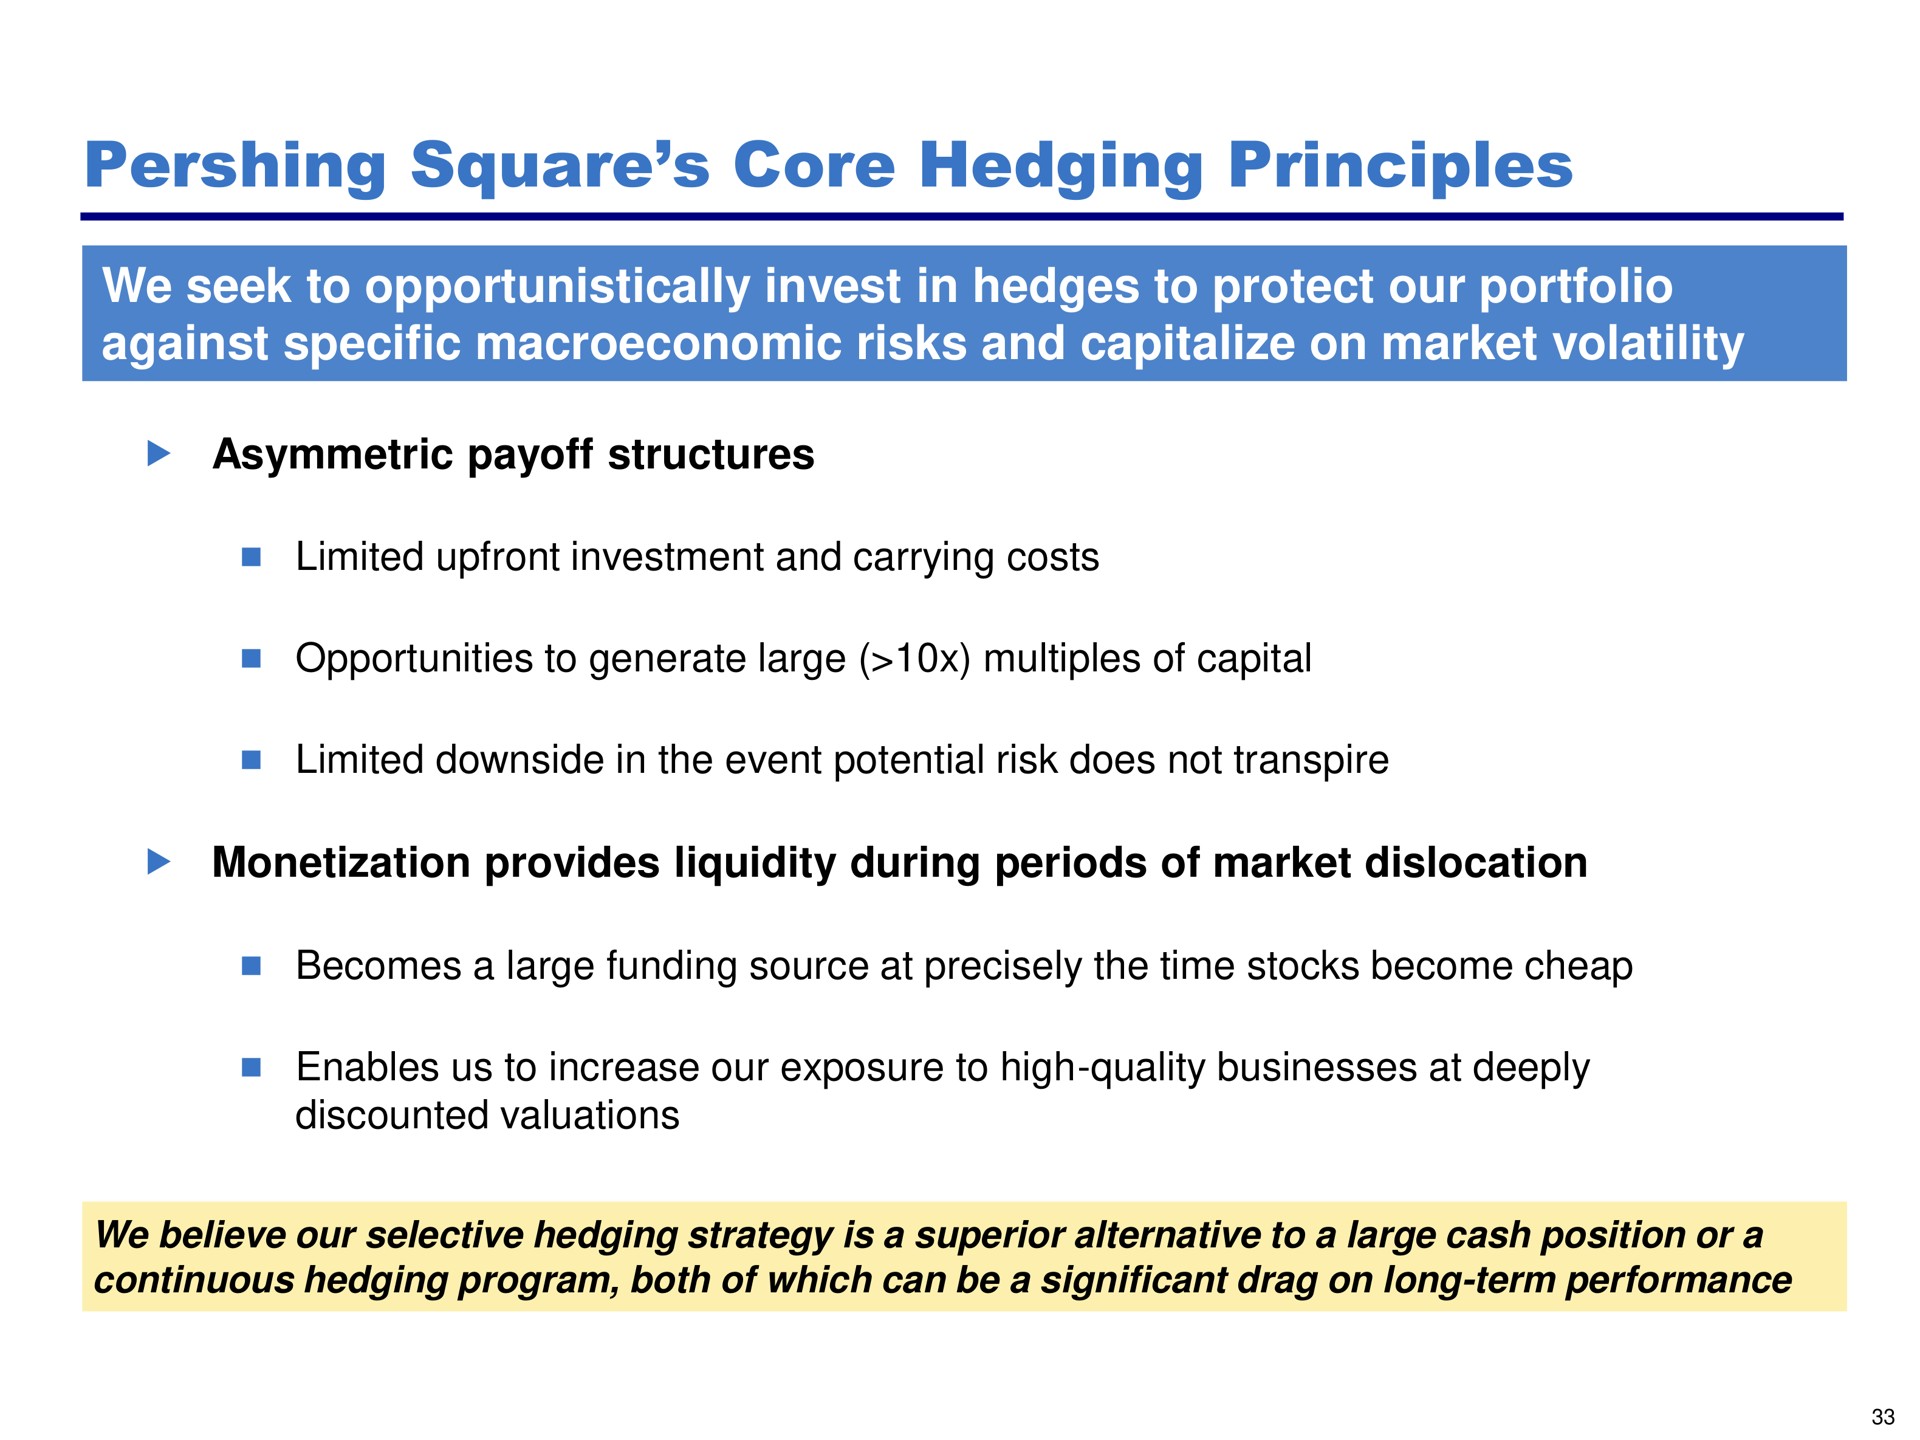 square core hedging principles we seek to opportunistically invest in hedges to protect our portfolio against specific risks and capitalize on market volatility | Pershing Square